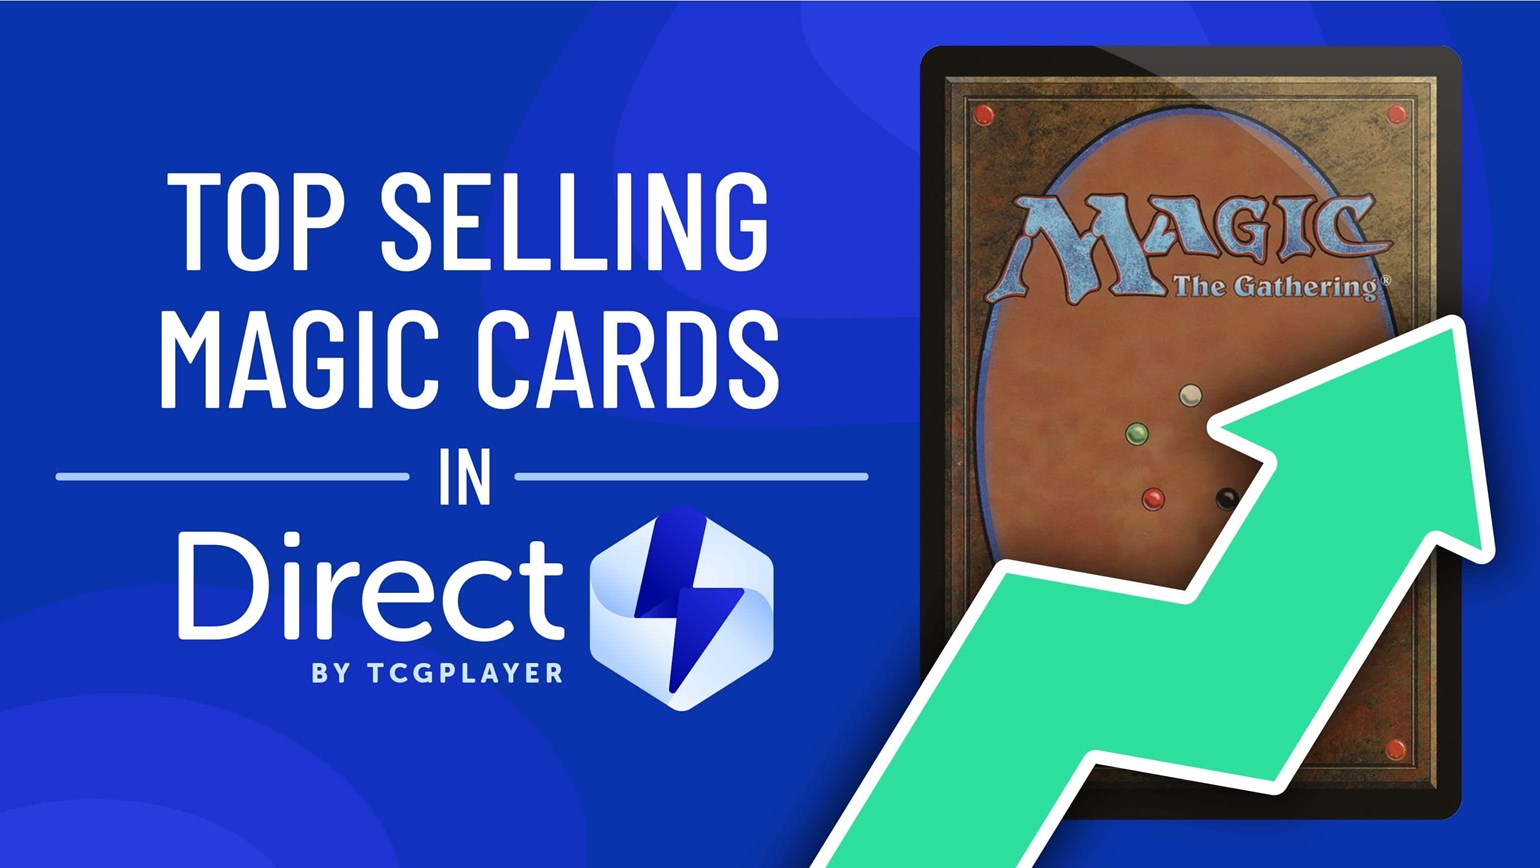 September Top Selling Magic: The Gathering Cards in Direct by TCGplayer